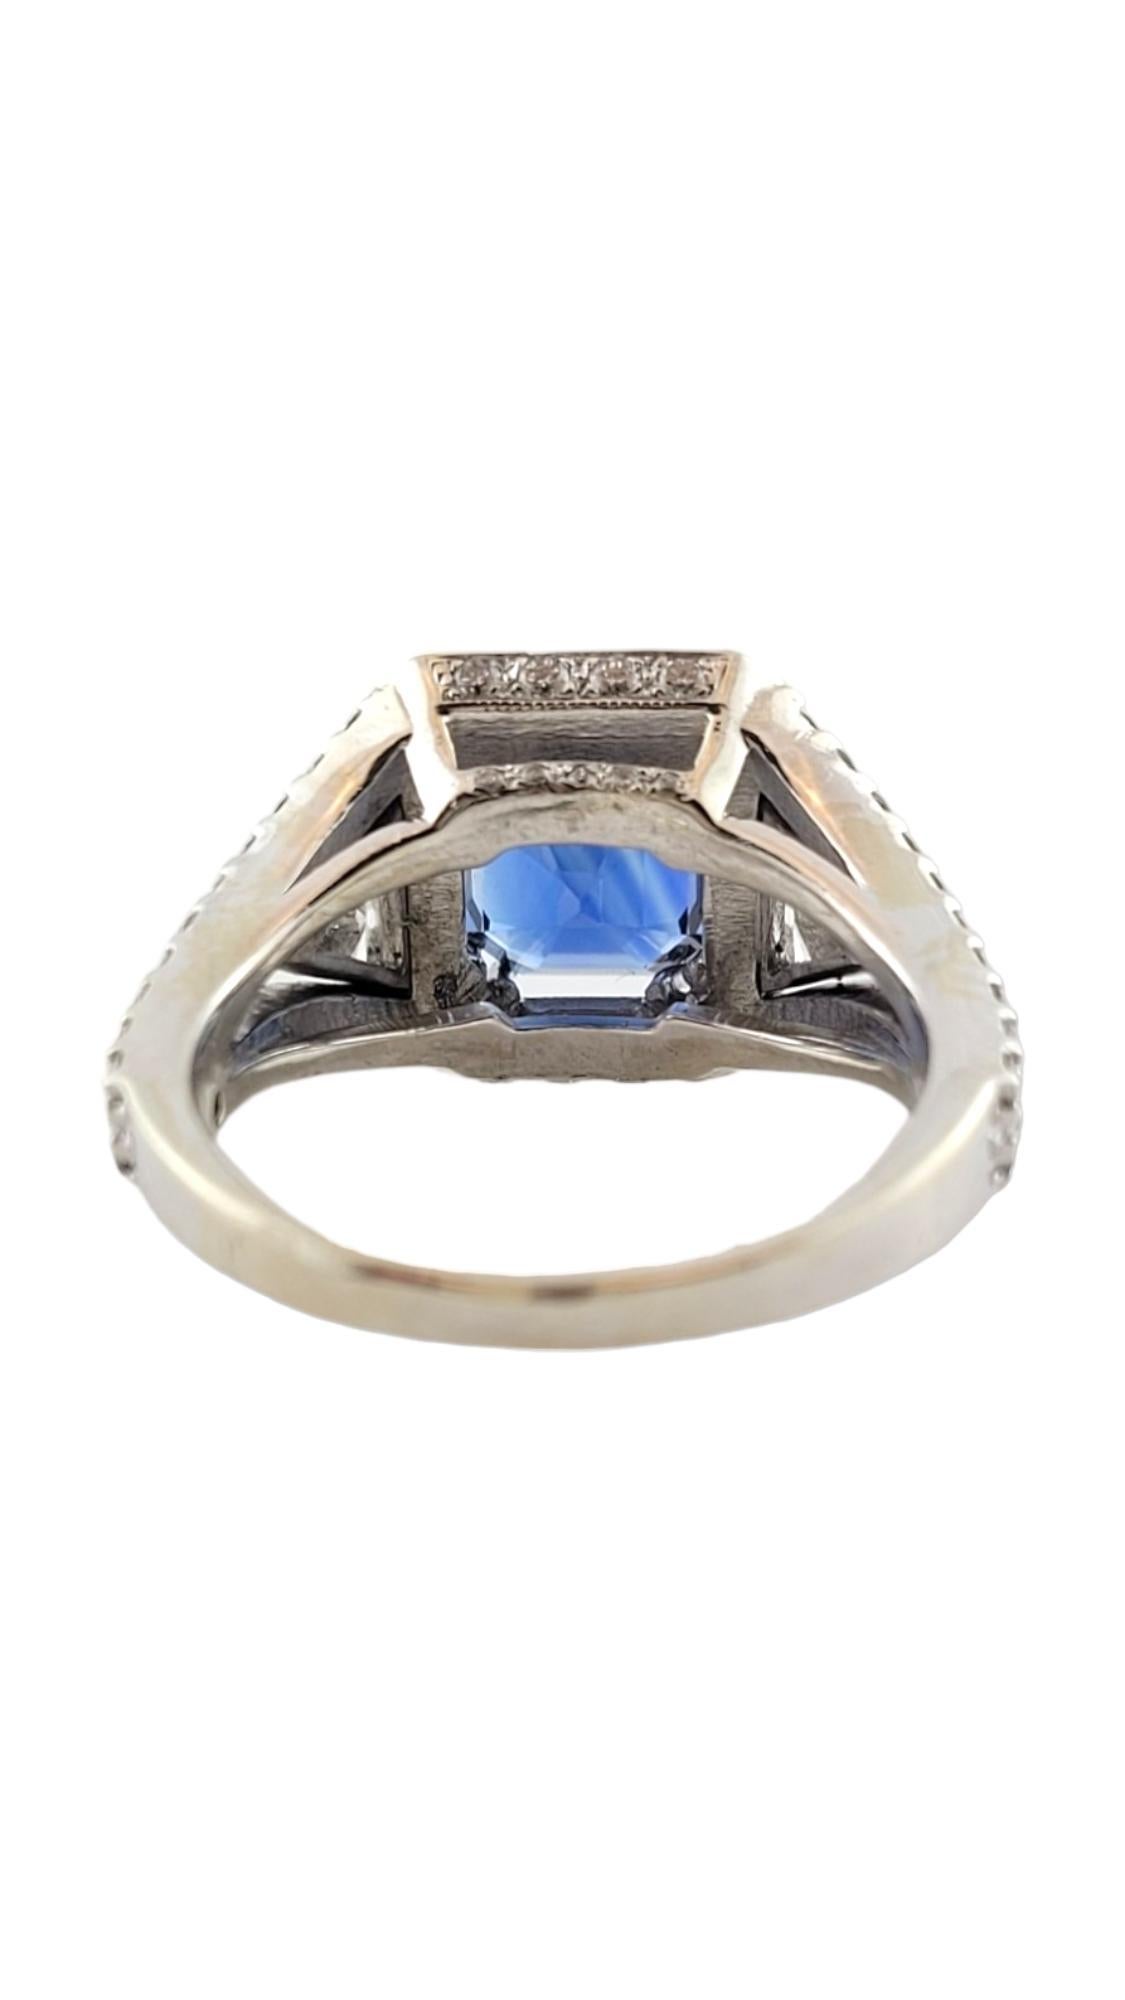 14K White Gold Diamond and Sapphire Engagement Ring Size 8.25 #16122 In Good Condition For Sale In Washington Depot, CT